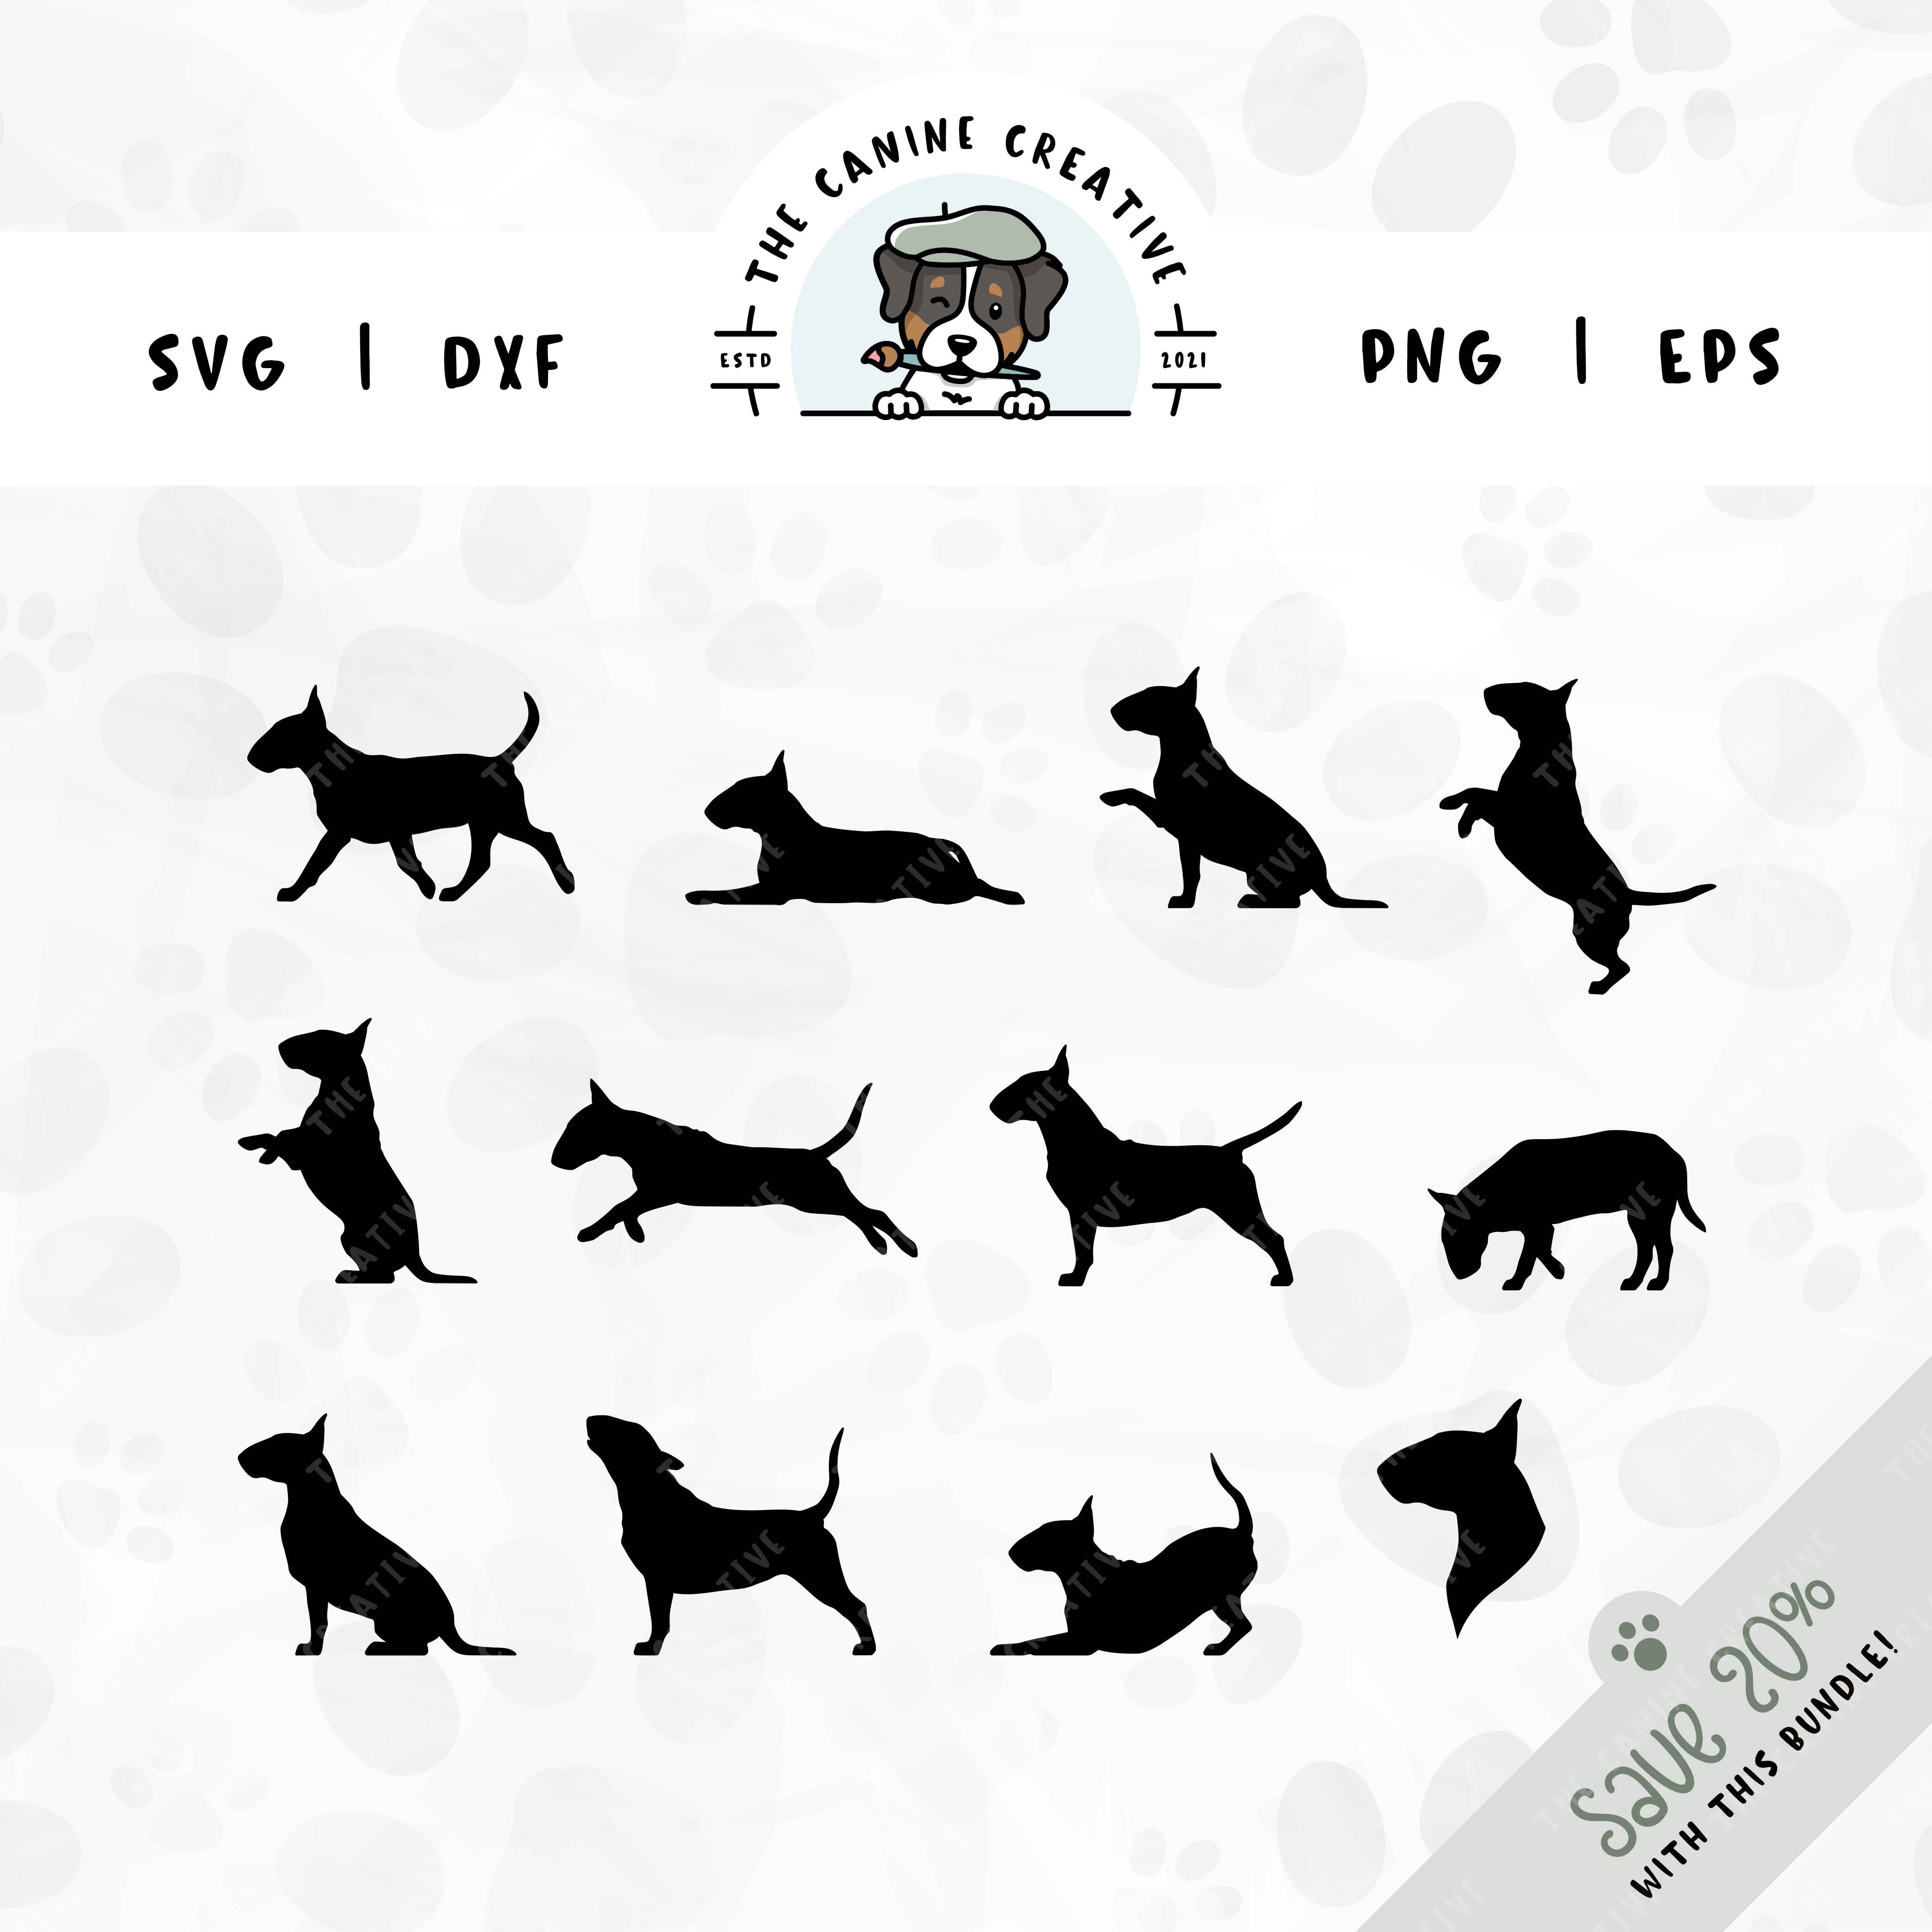 This 12-pack Bull Terrier silhouette bundle features a dog's head in profile, along with various poses including running, laying down, playing, standing, sitting, walking, jumping up, sniffing, begging, howling, and shaking a paw. File formats include: SVG, DXF, PNG, and EPS.